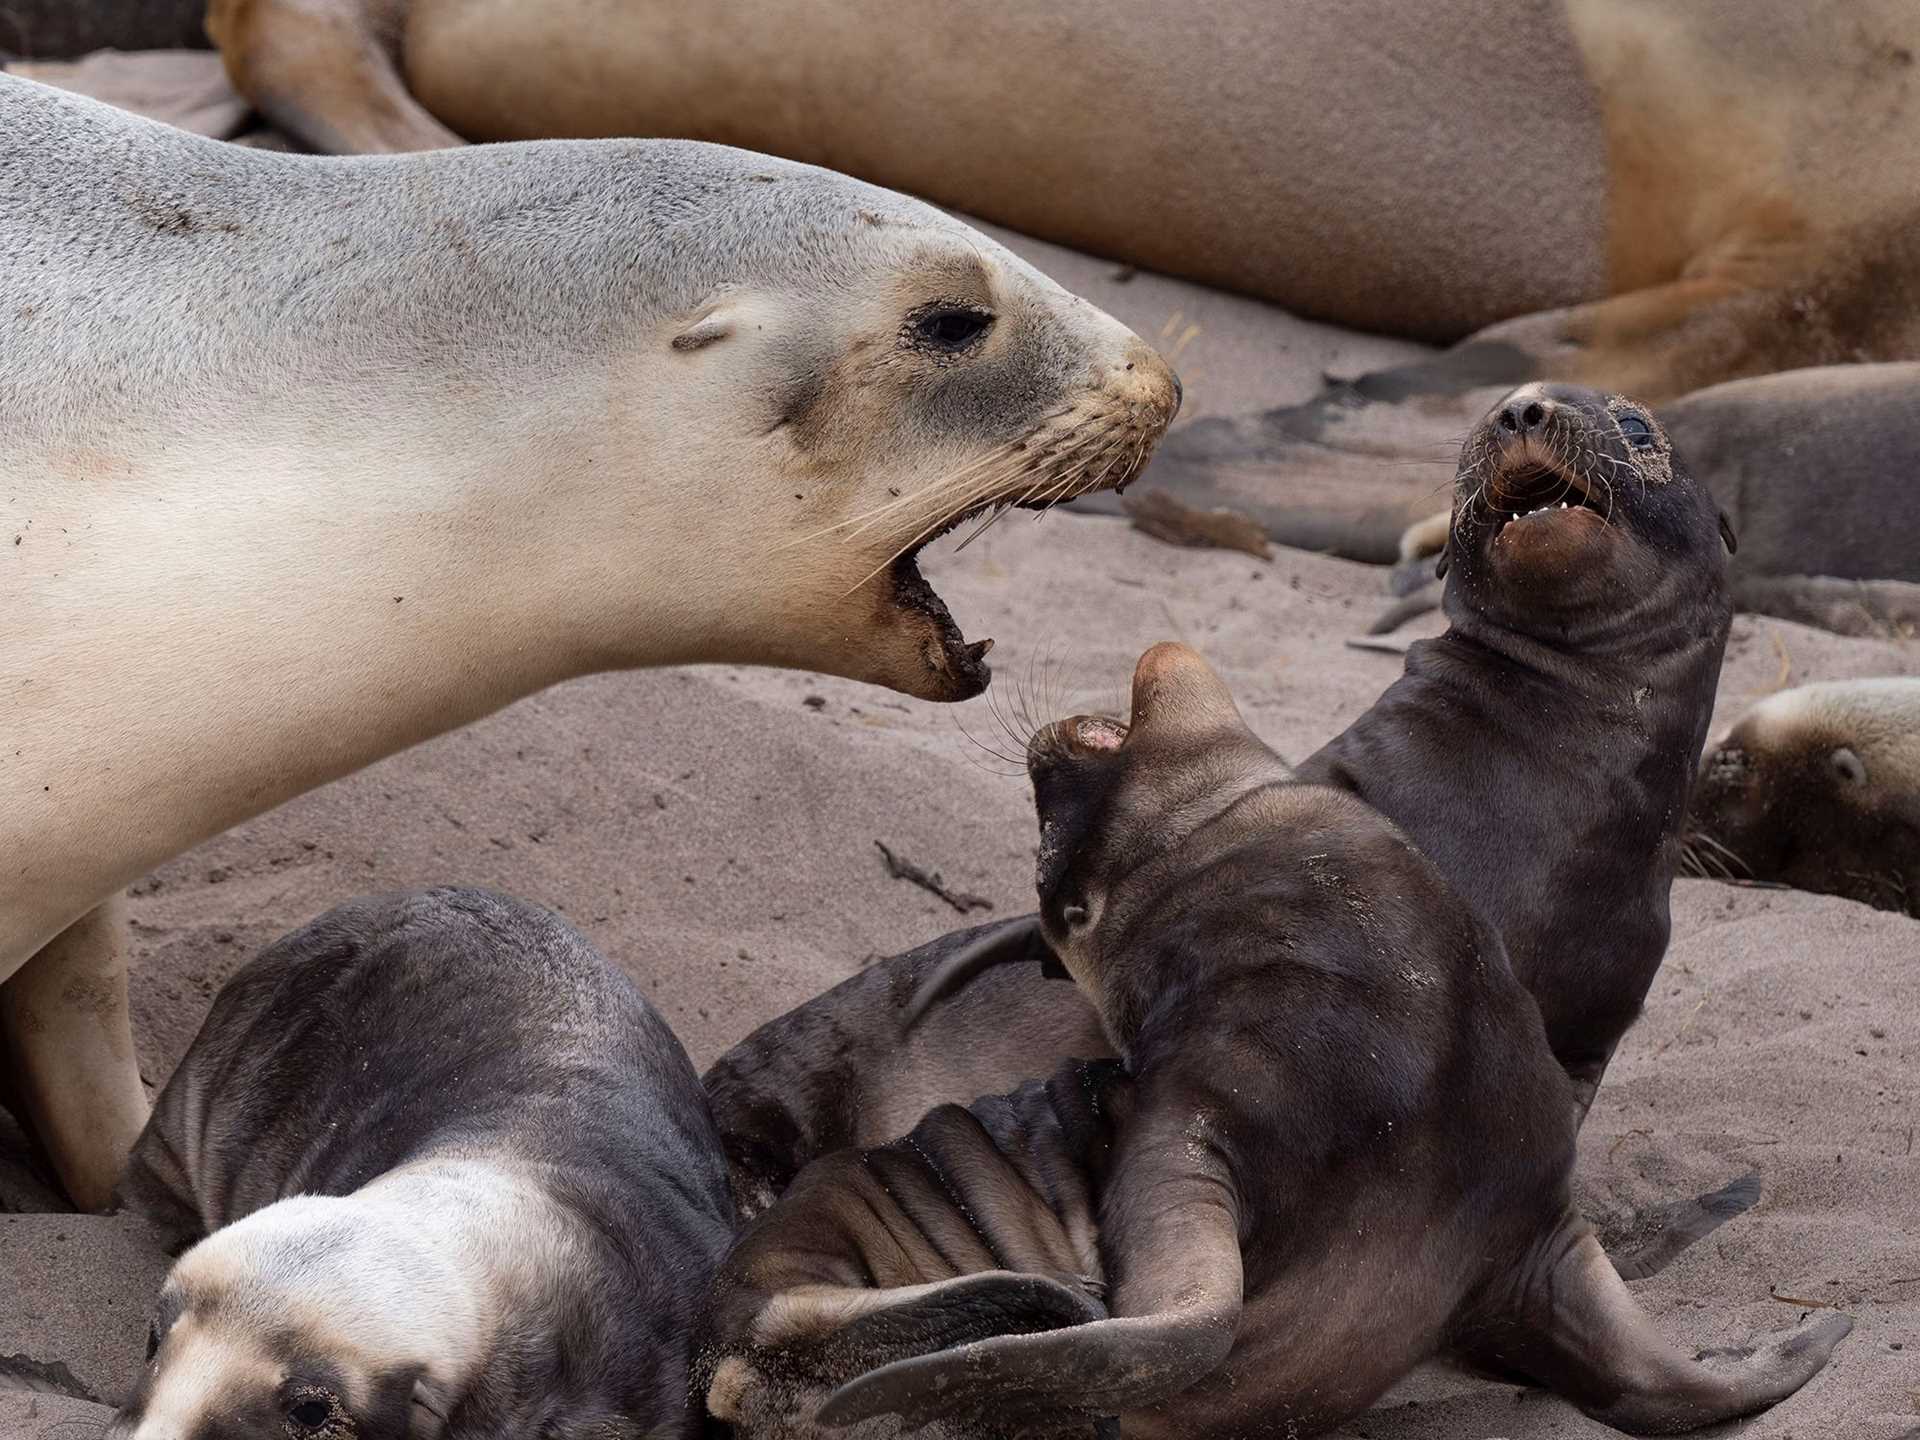 sea lion appearing to yell at its pup